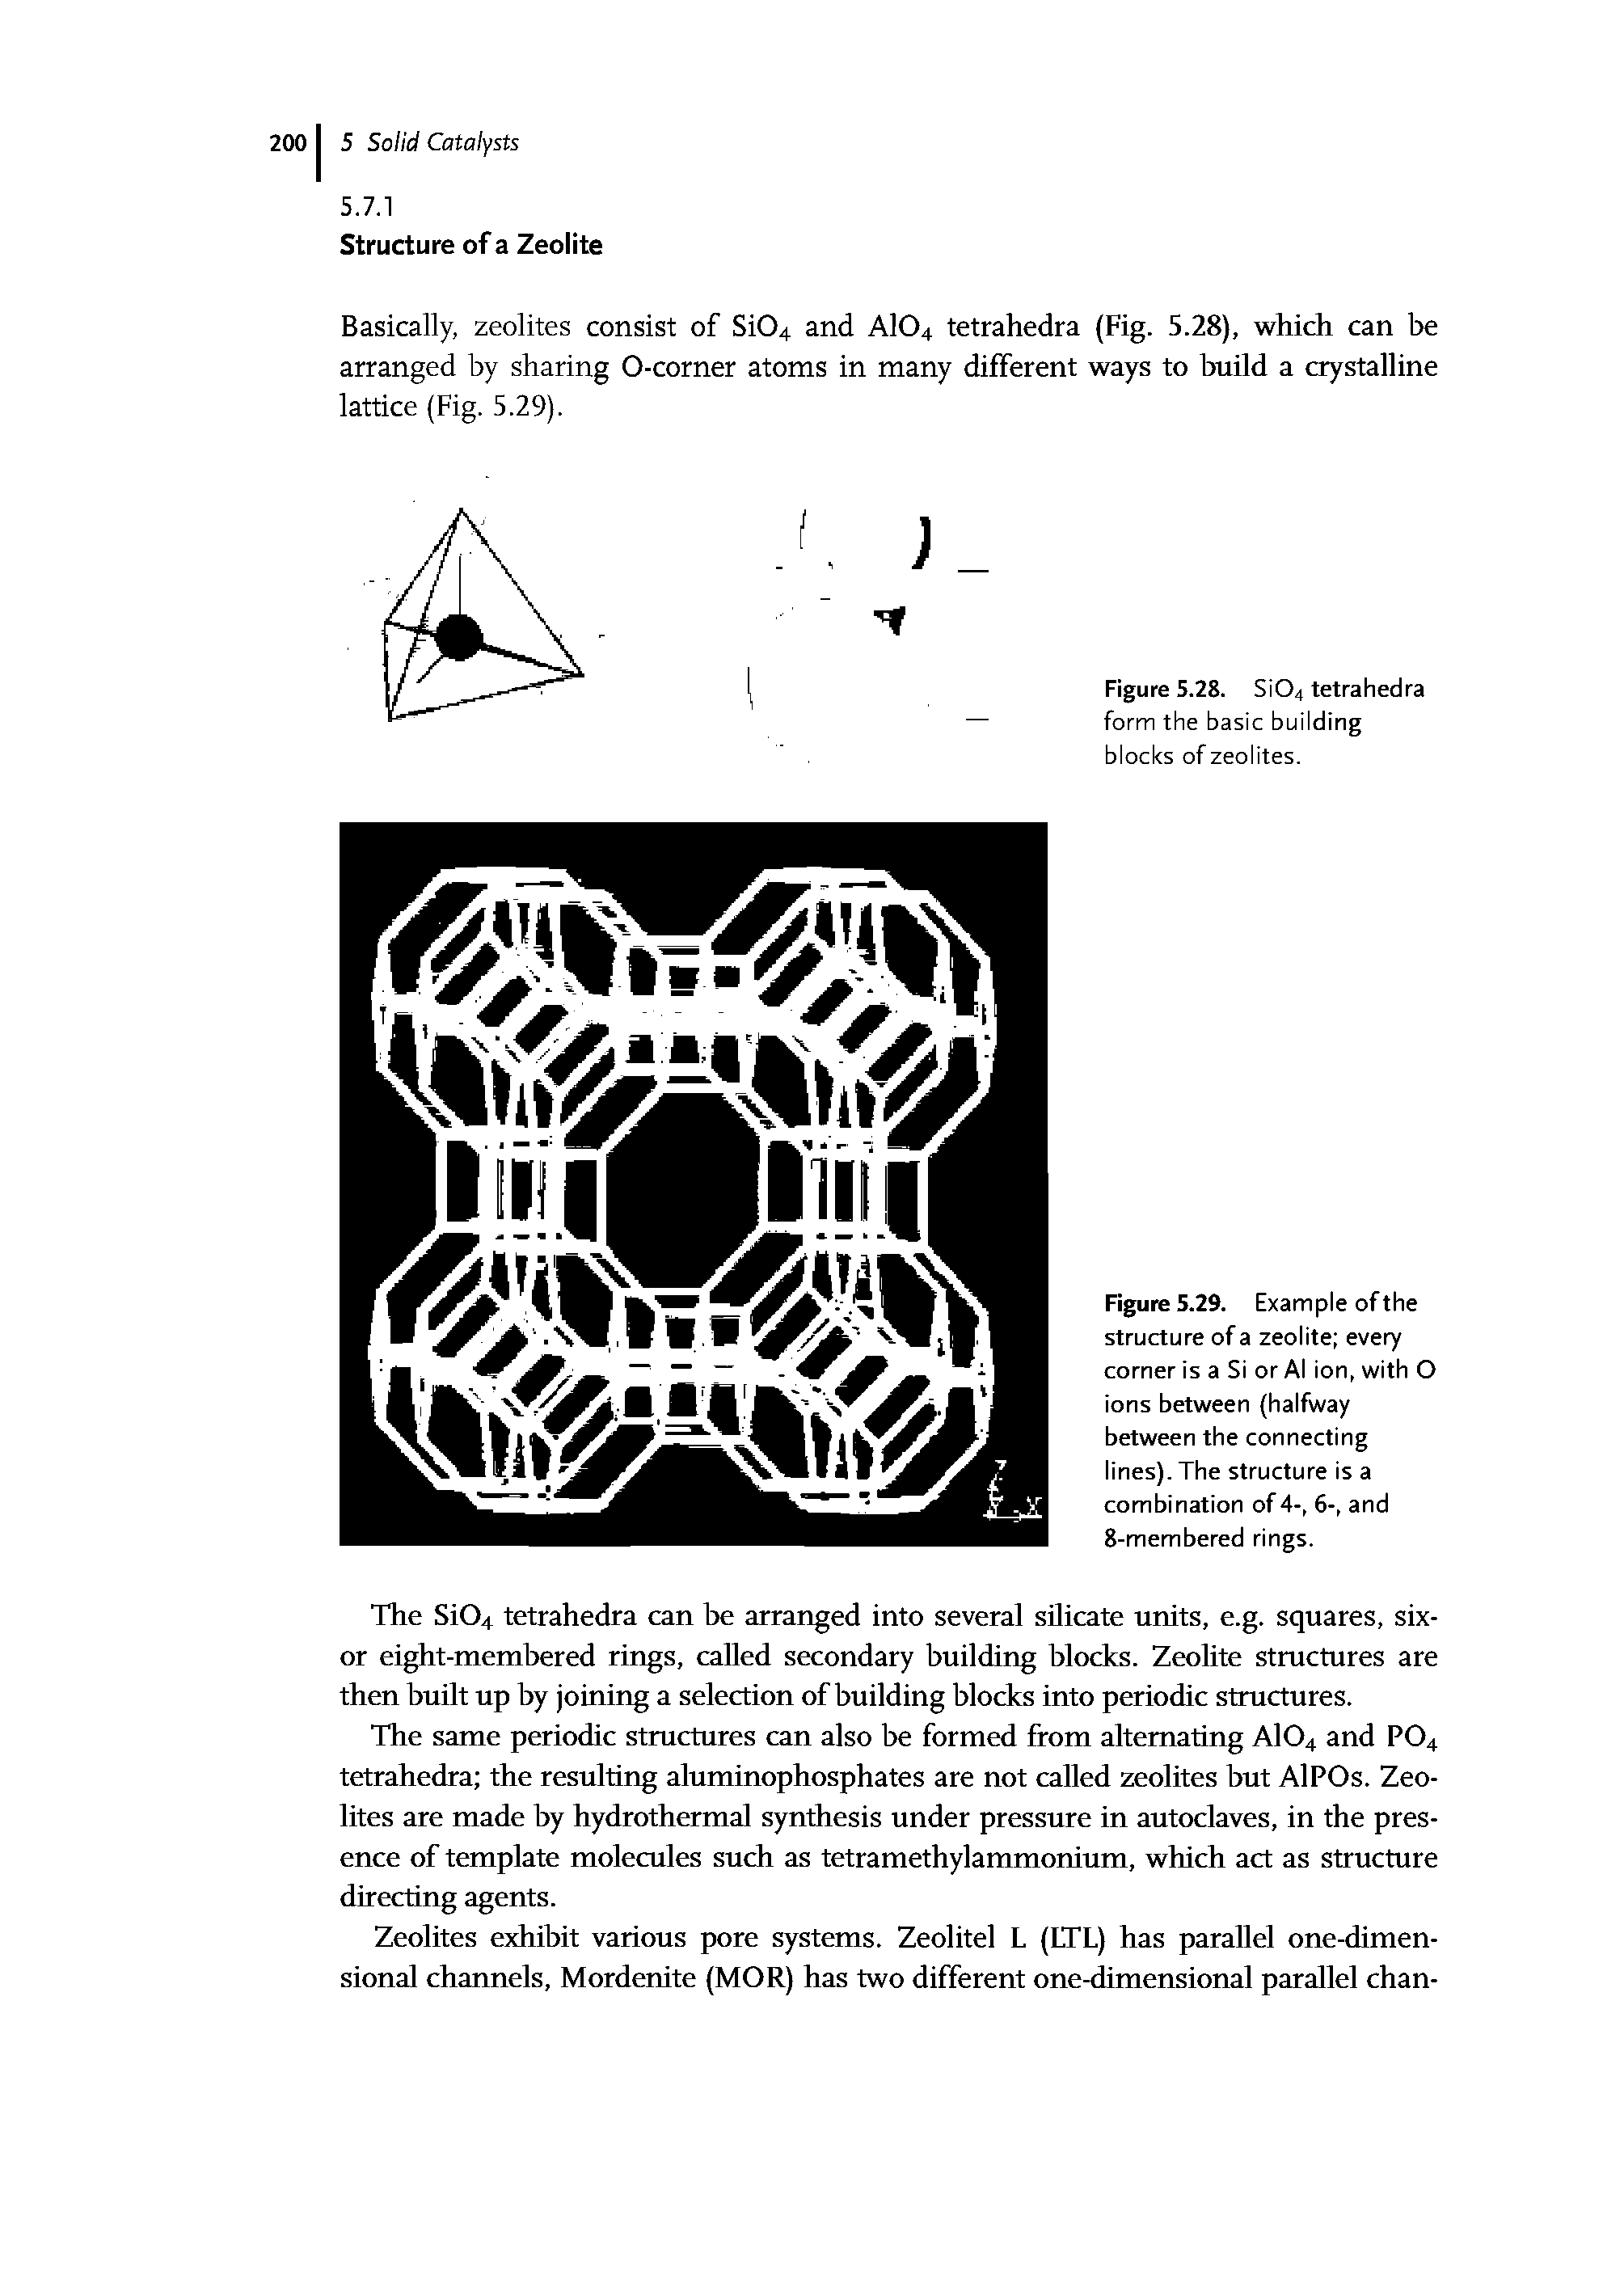 Figure 5.29. Example of the structure of a zeolite every corner is a Si or Al ion, with O ions between (halfway between the connecting lines). The structure is a combination of 4-, 6-, and 8-membered rings.